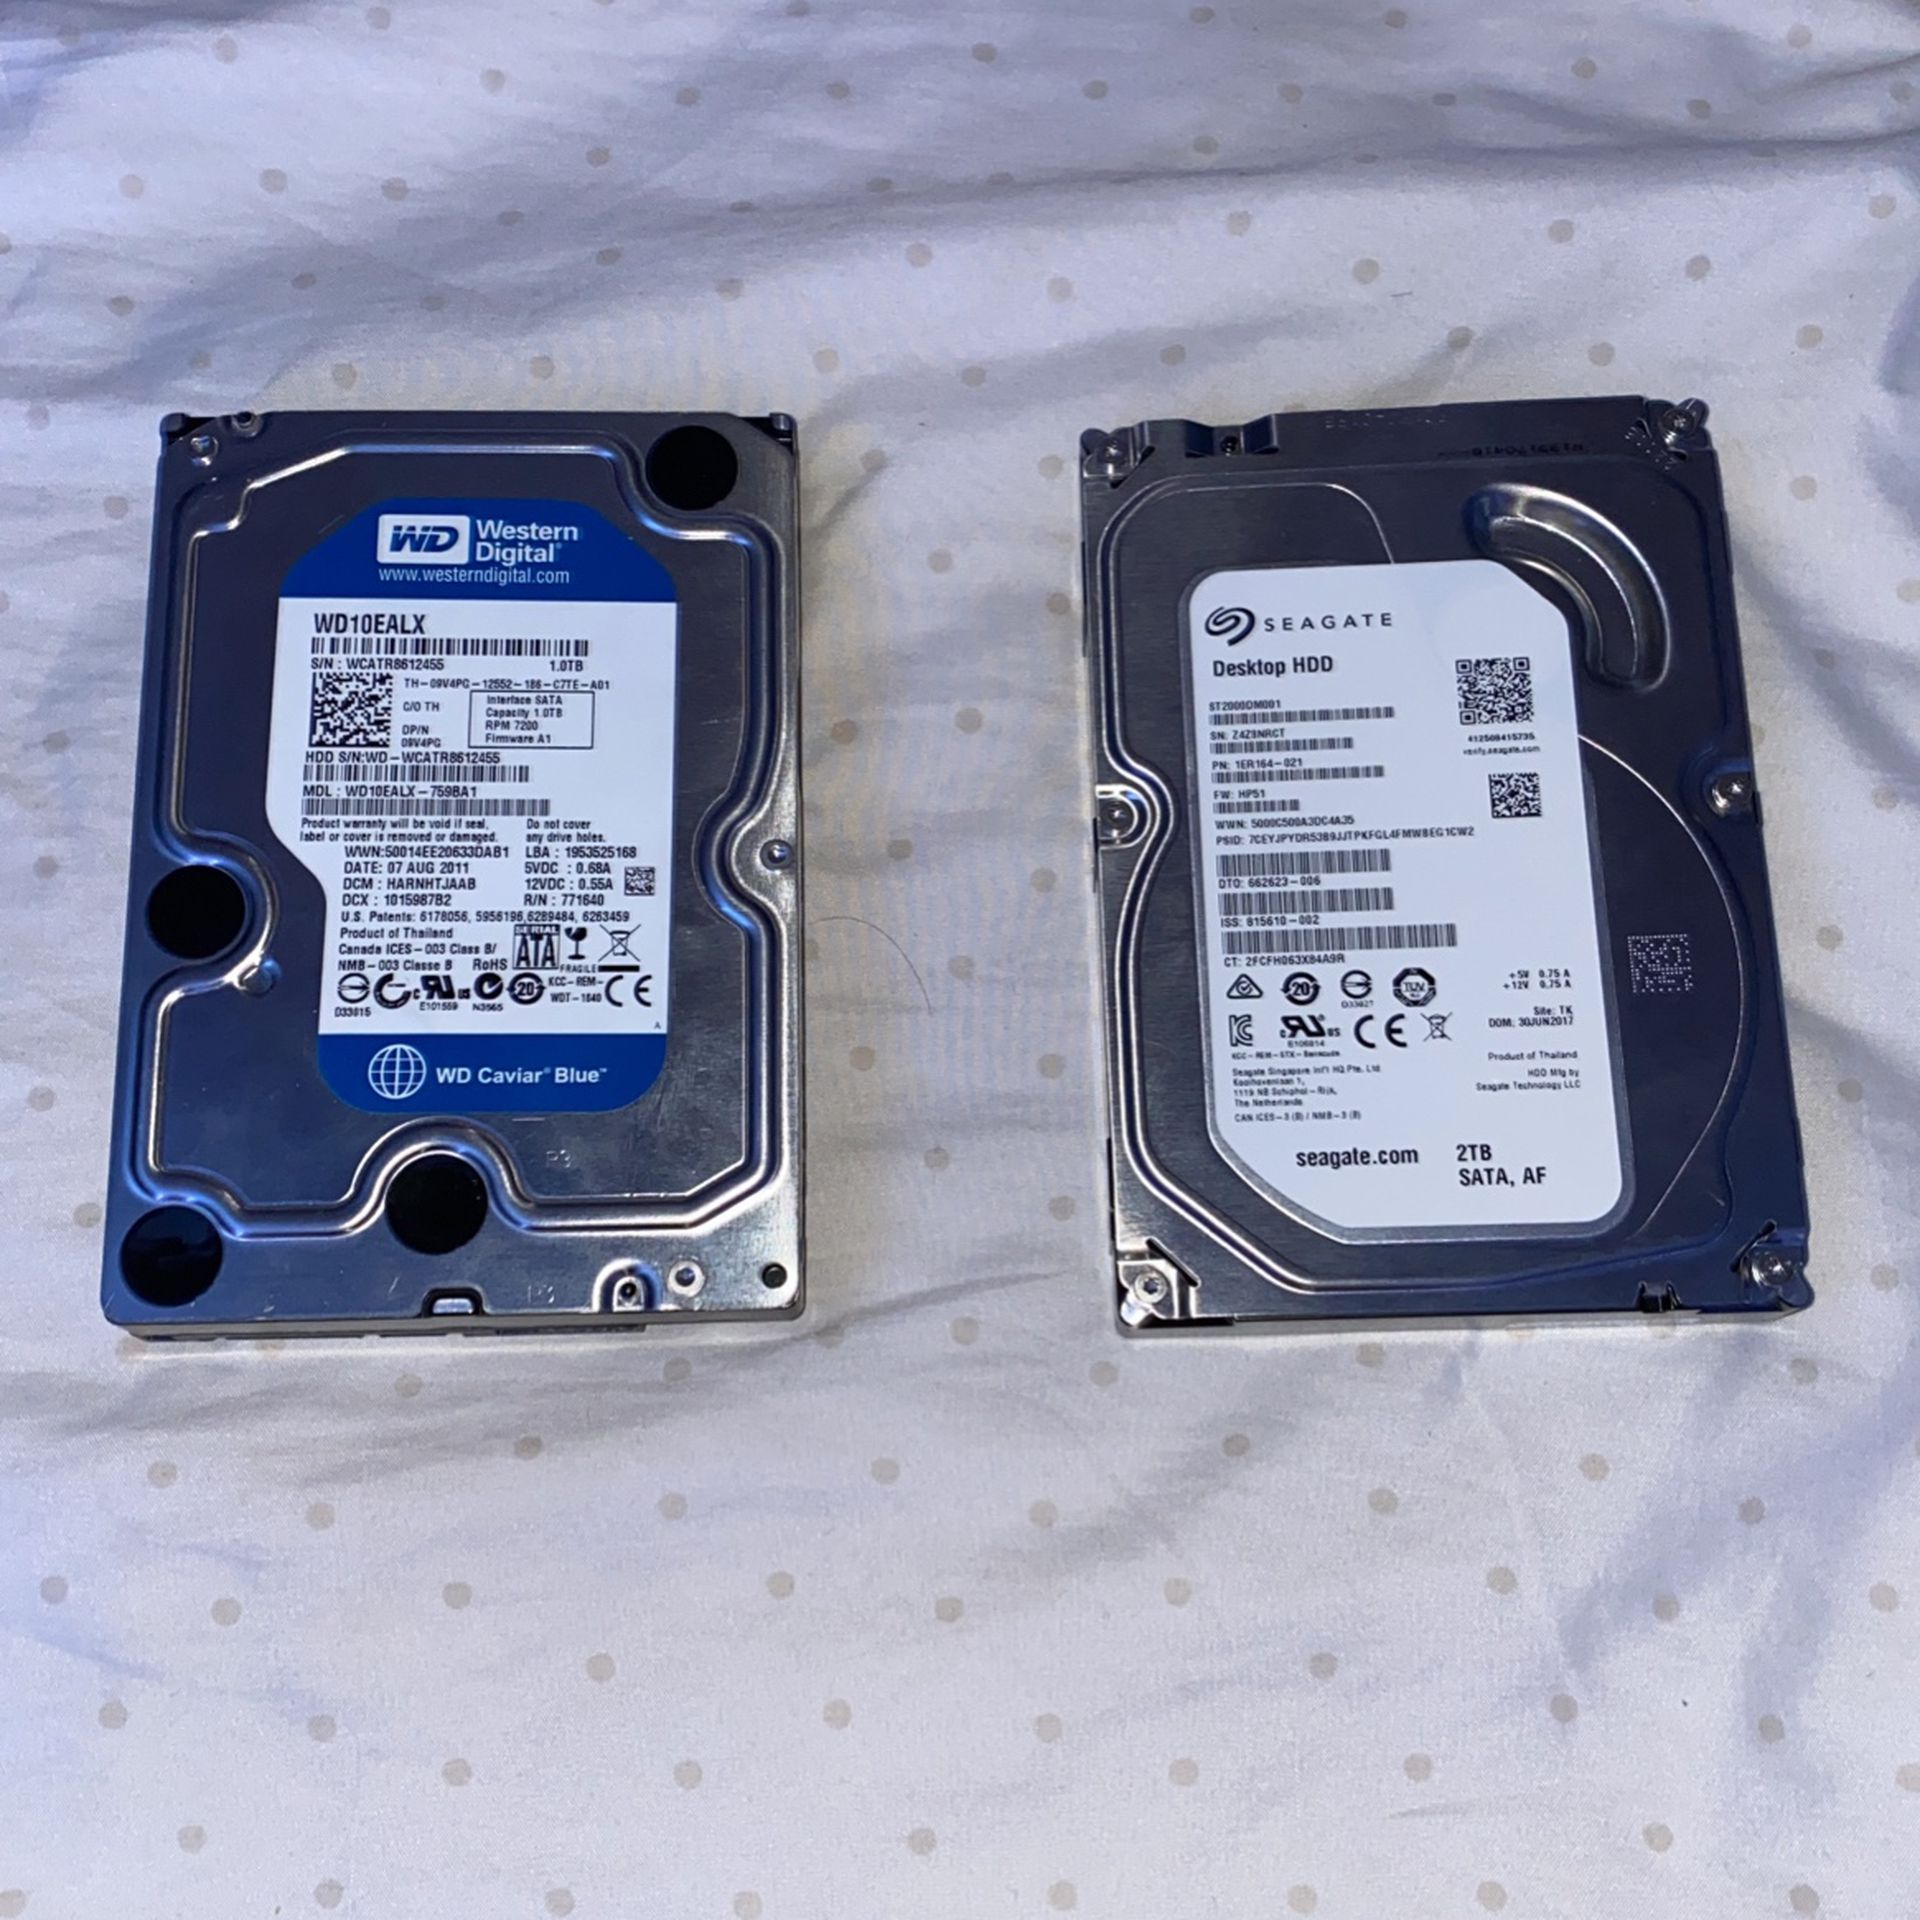 2 Hard Drives For Sale 